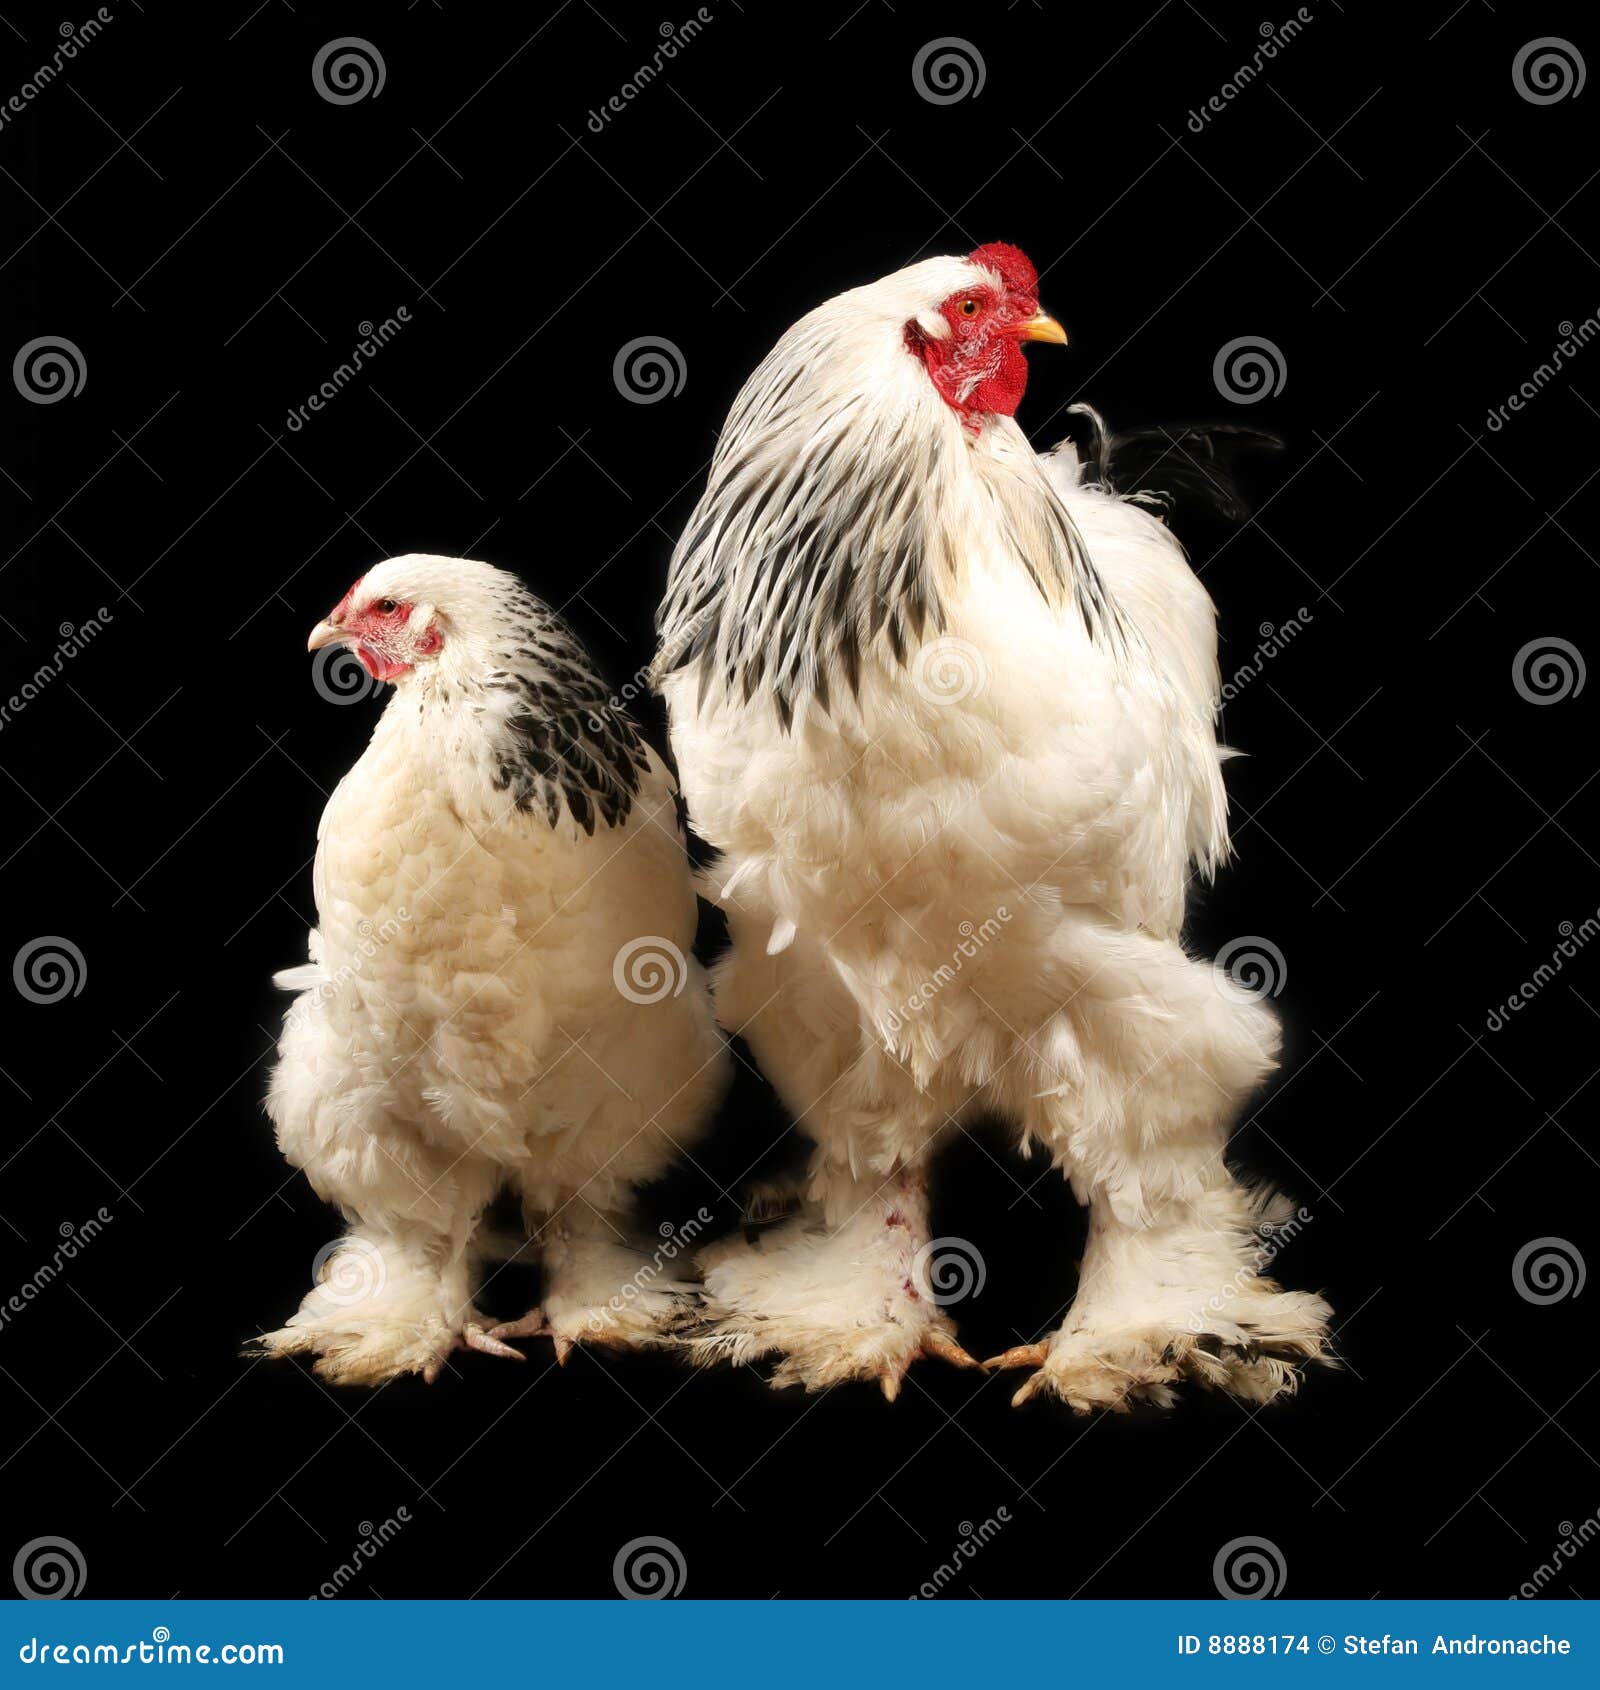 556 Brahma Chicken Farm Rooster Stock Photos - Free & Royalty-Free